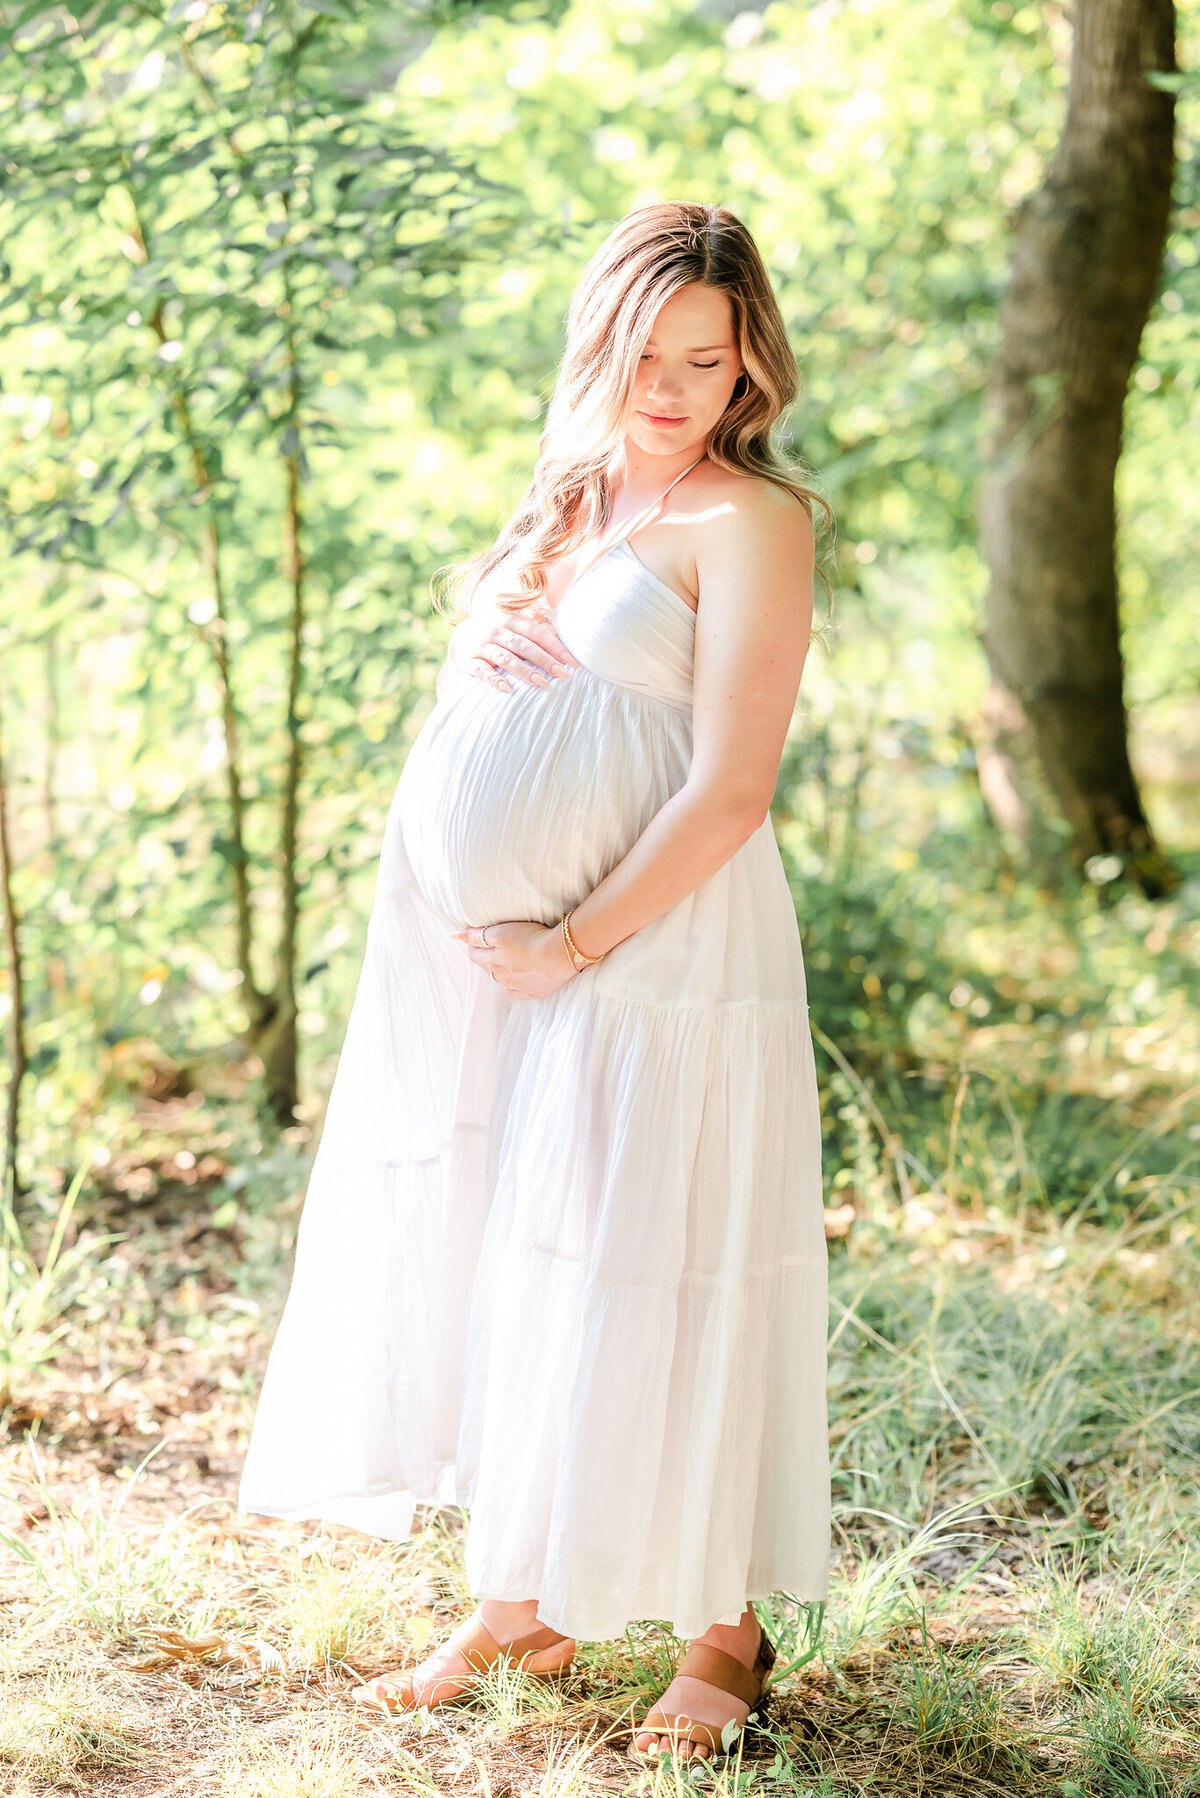 A mama-to-be stands in the sunlight under some trees. She wears a simple white summer dress during her Chesapeake Maternity Photography session.